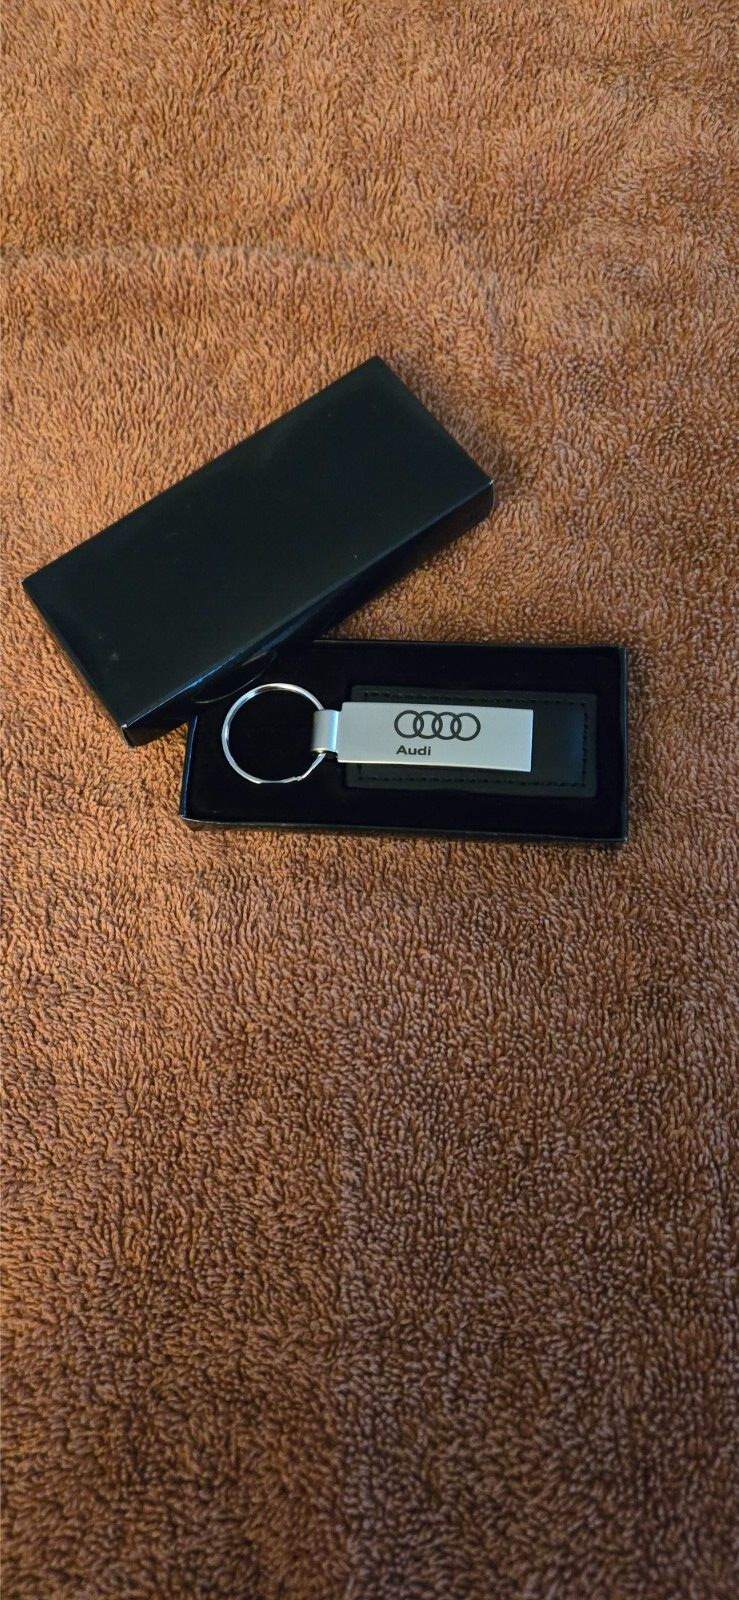 AUDI Key Ring (in a gift box)